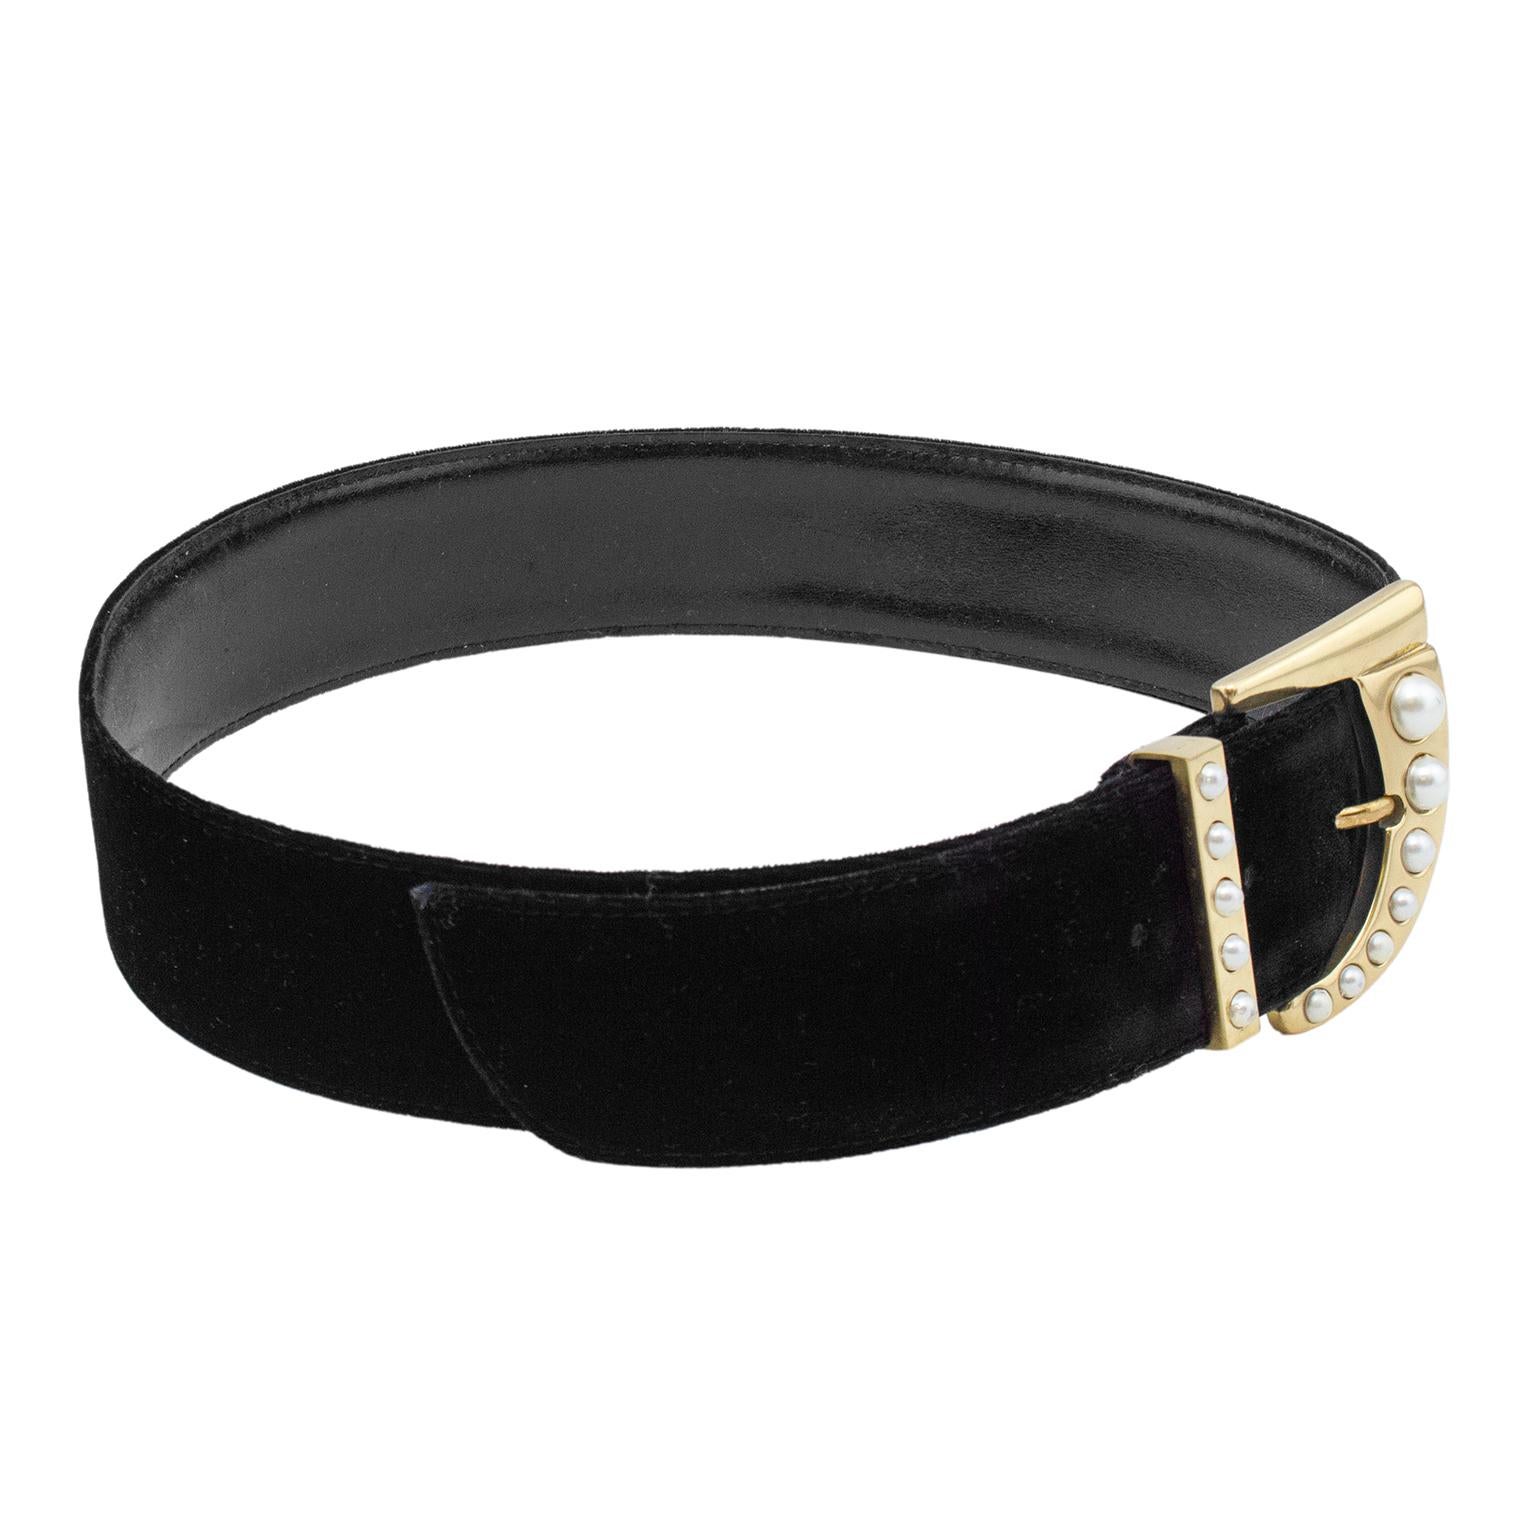 Stunning 1990s Gianni Versace black cut velvet thick belt. Heavy gold tone hardware, asymmetrical buckle with faux pearl details. Black leather interior with gold brand stamp. Marked size IT 32